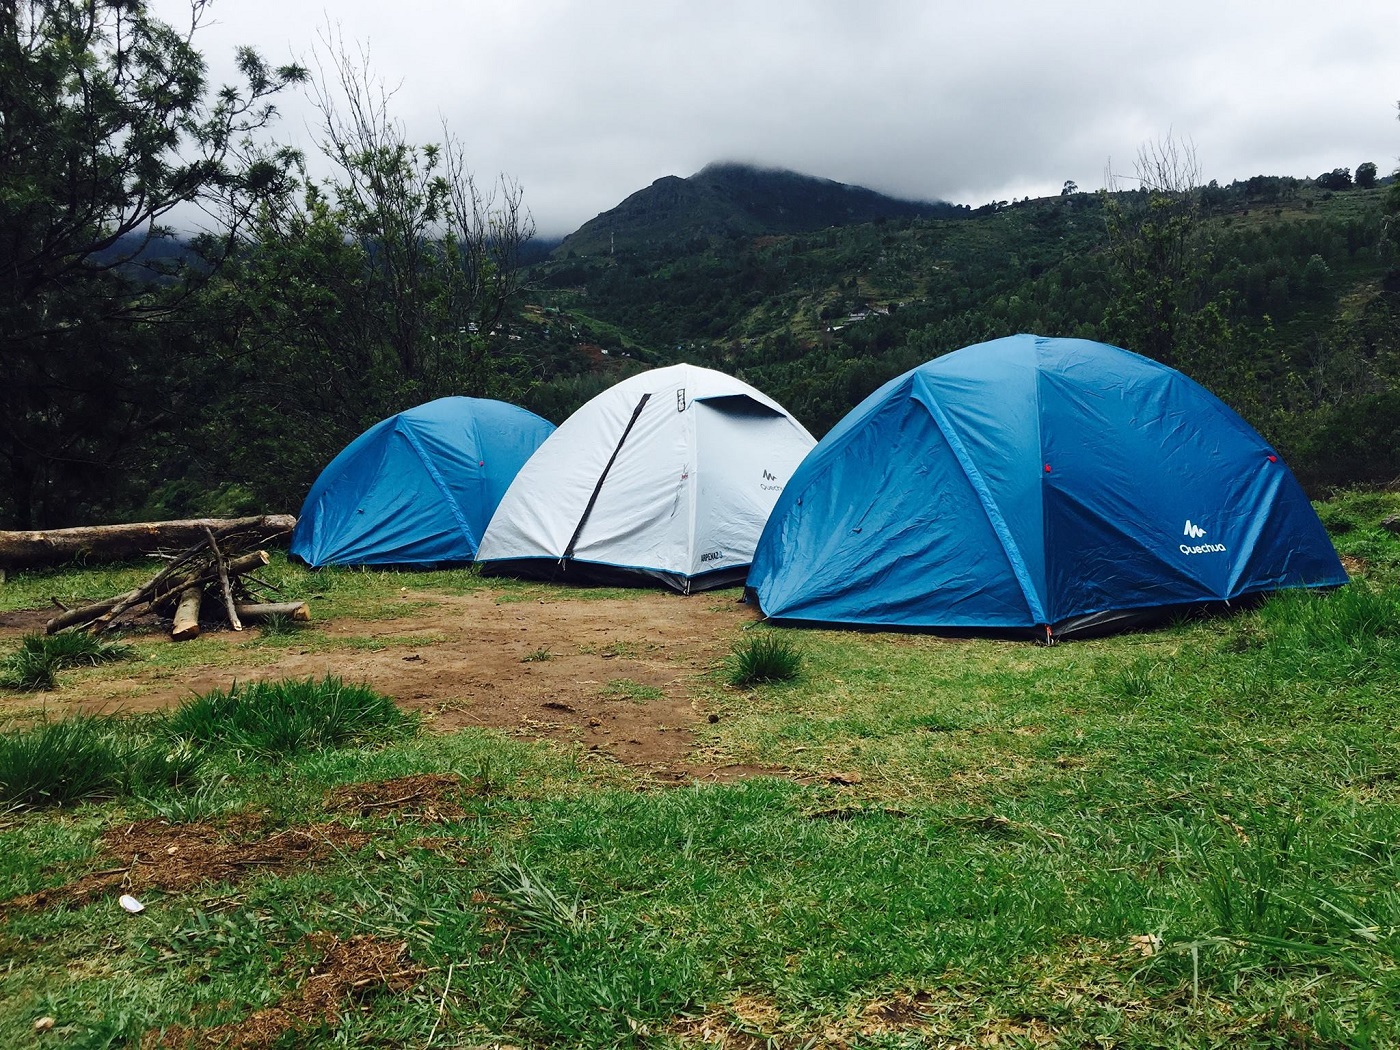 Camping in Ooty